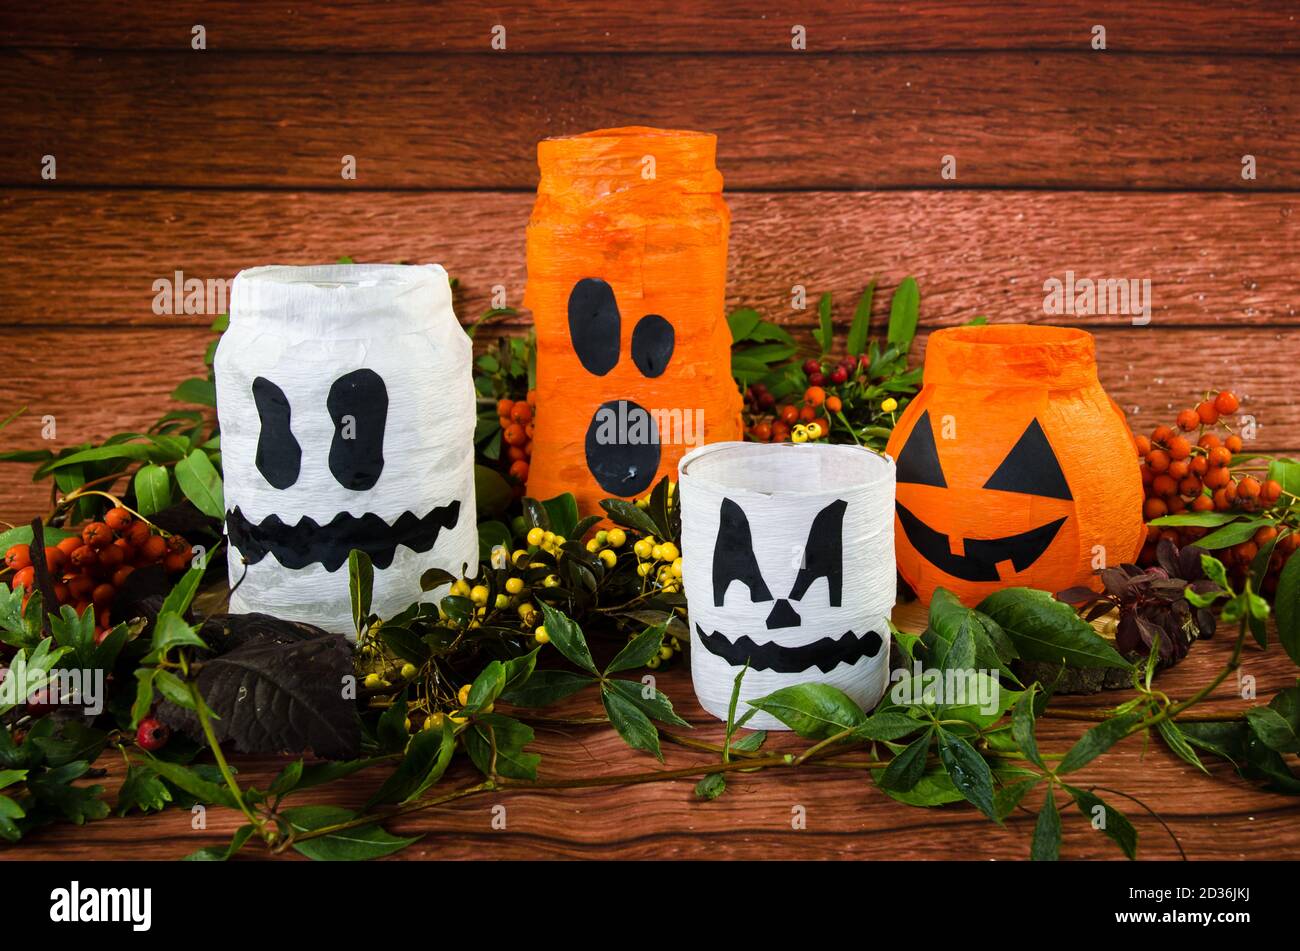 funny carved traditional halloween pumpkins with burning candle inside Stock Photo